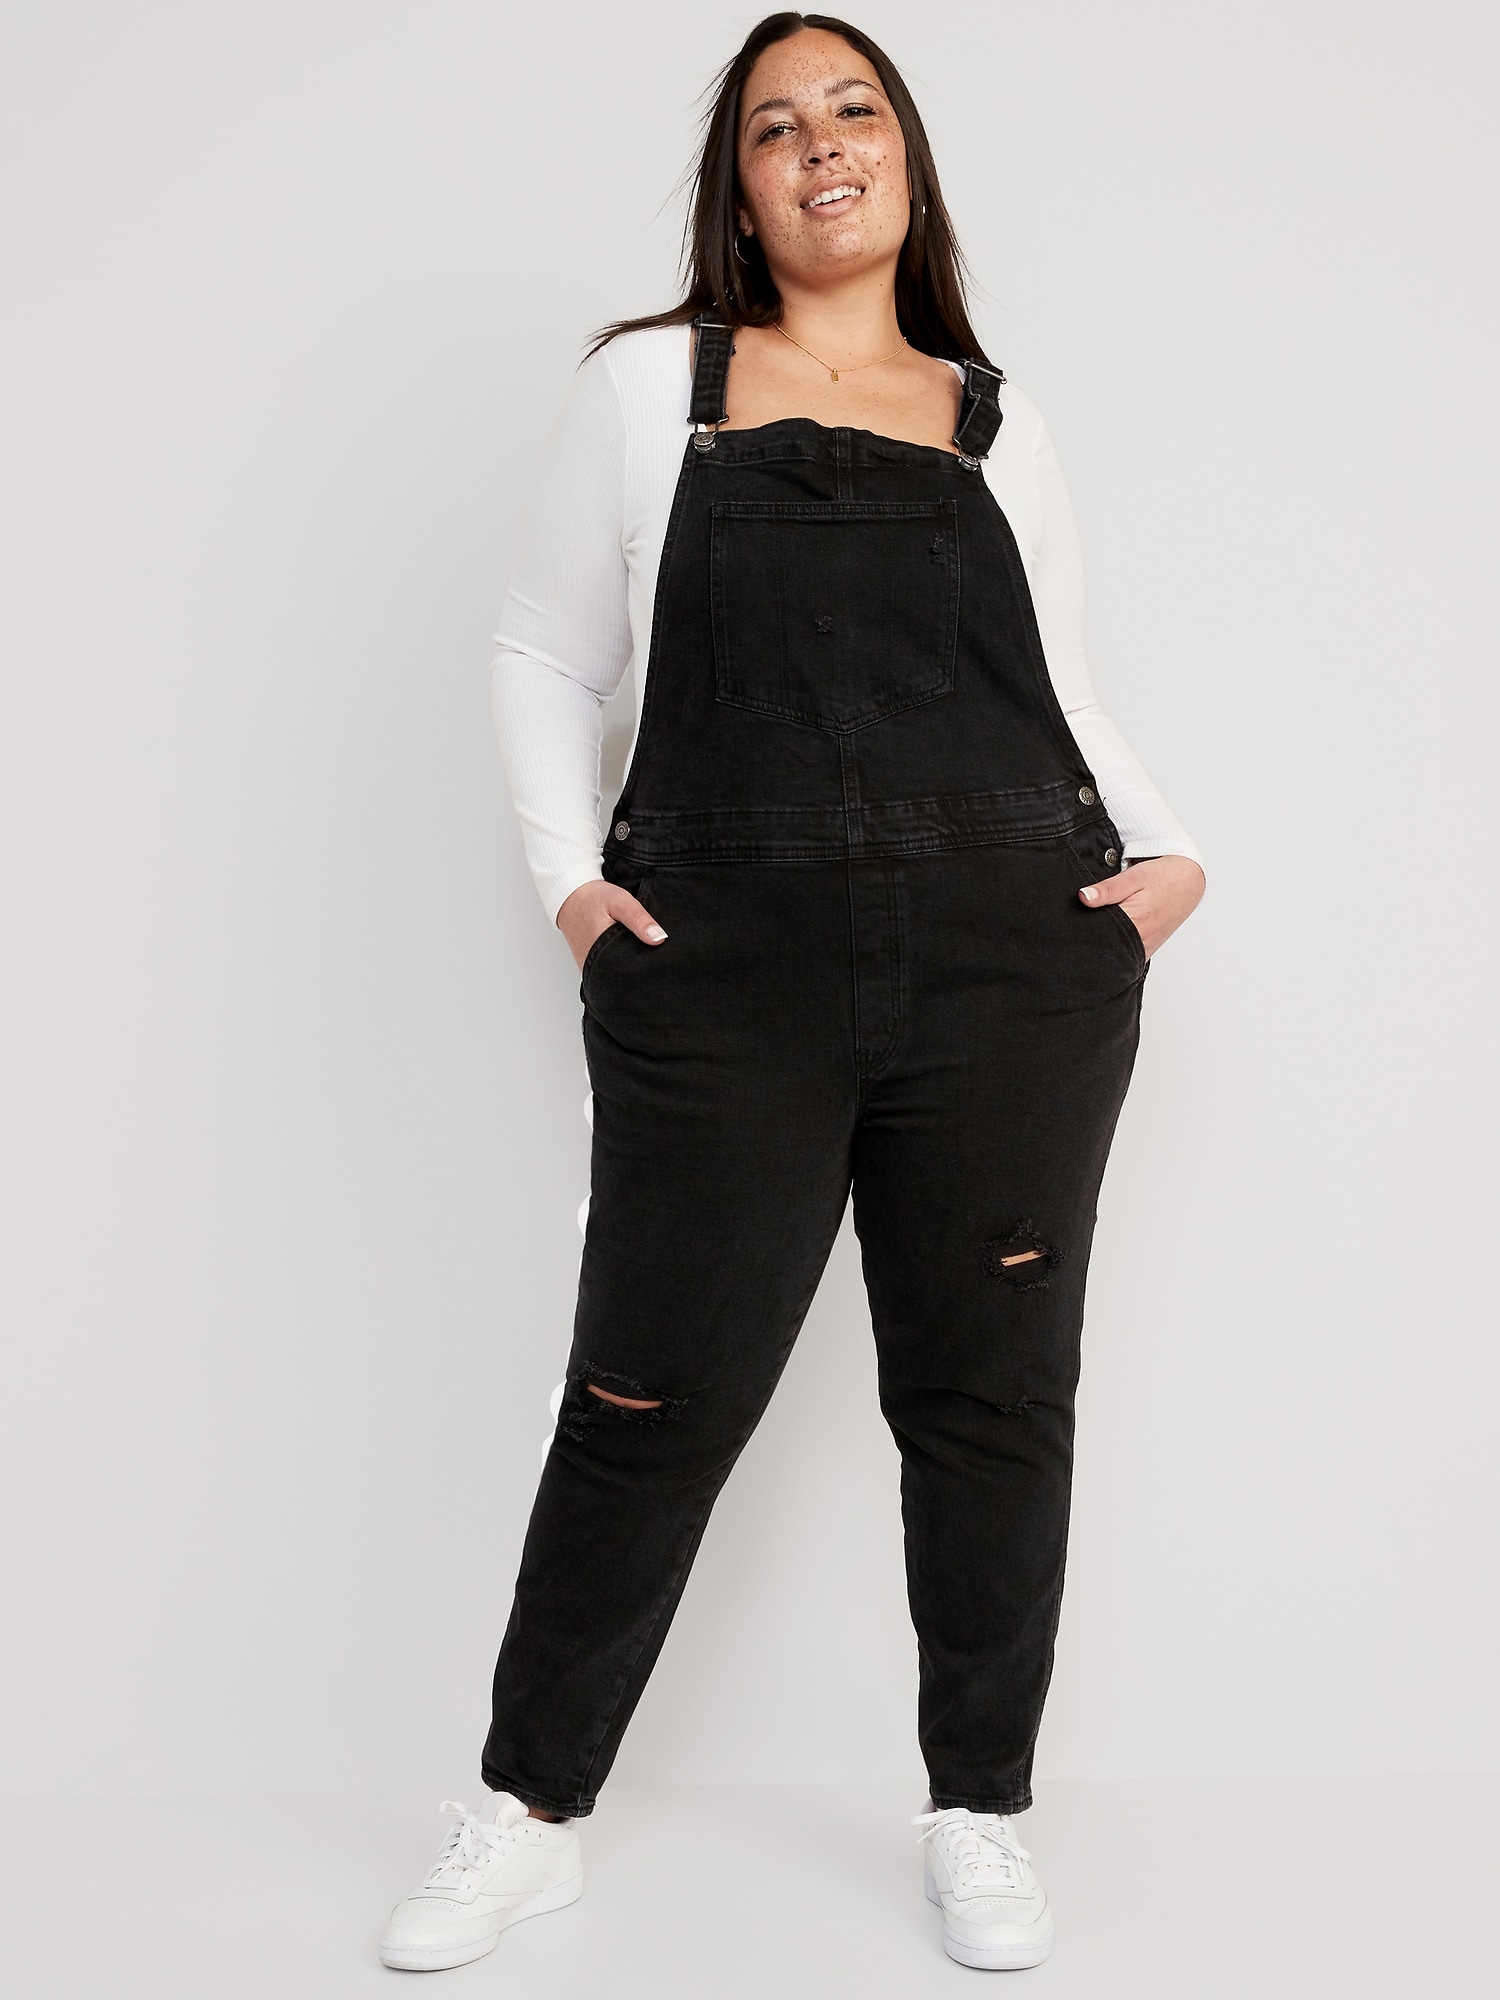 OG Straight Black-Wash Ripped Jean Overalls | Old Navy